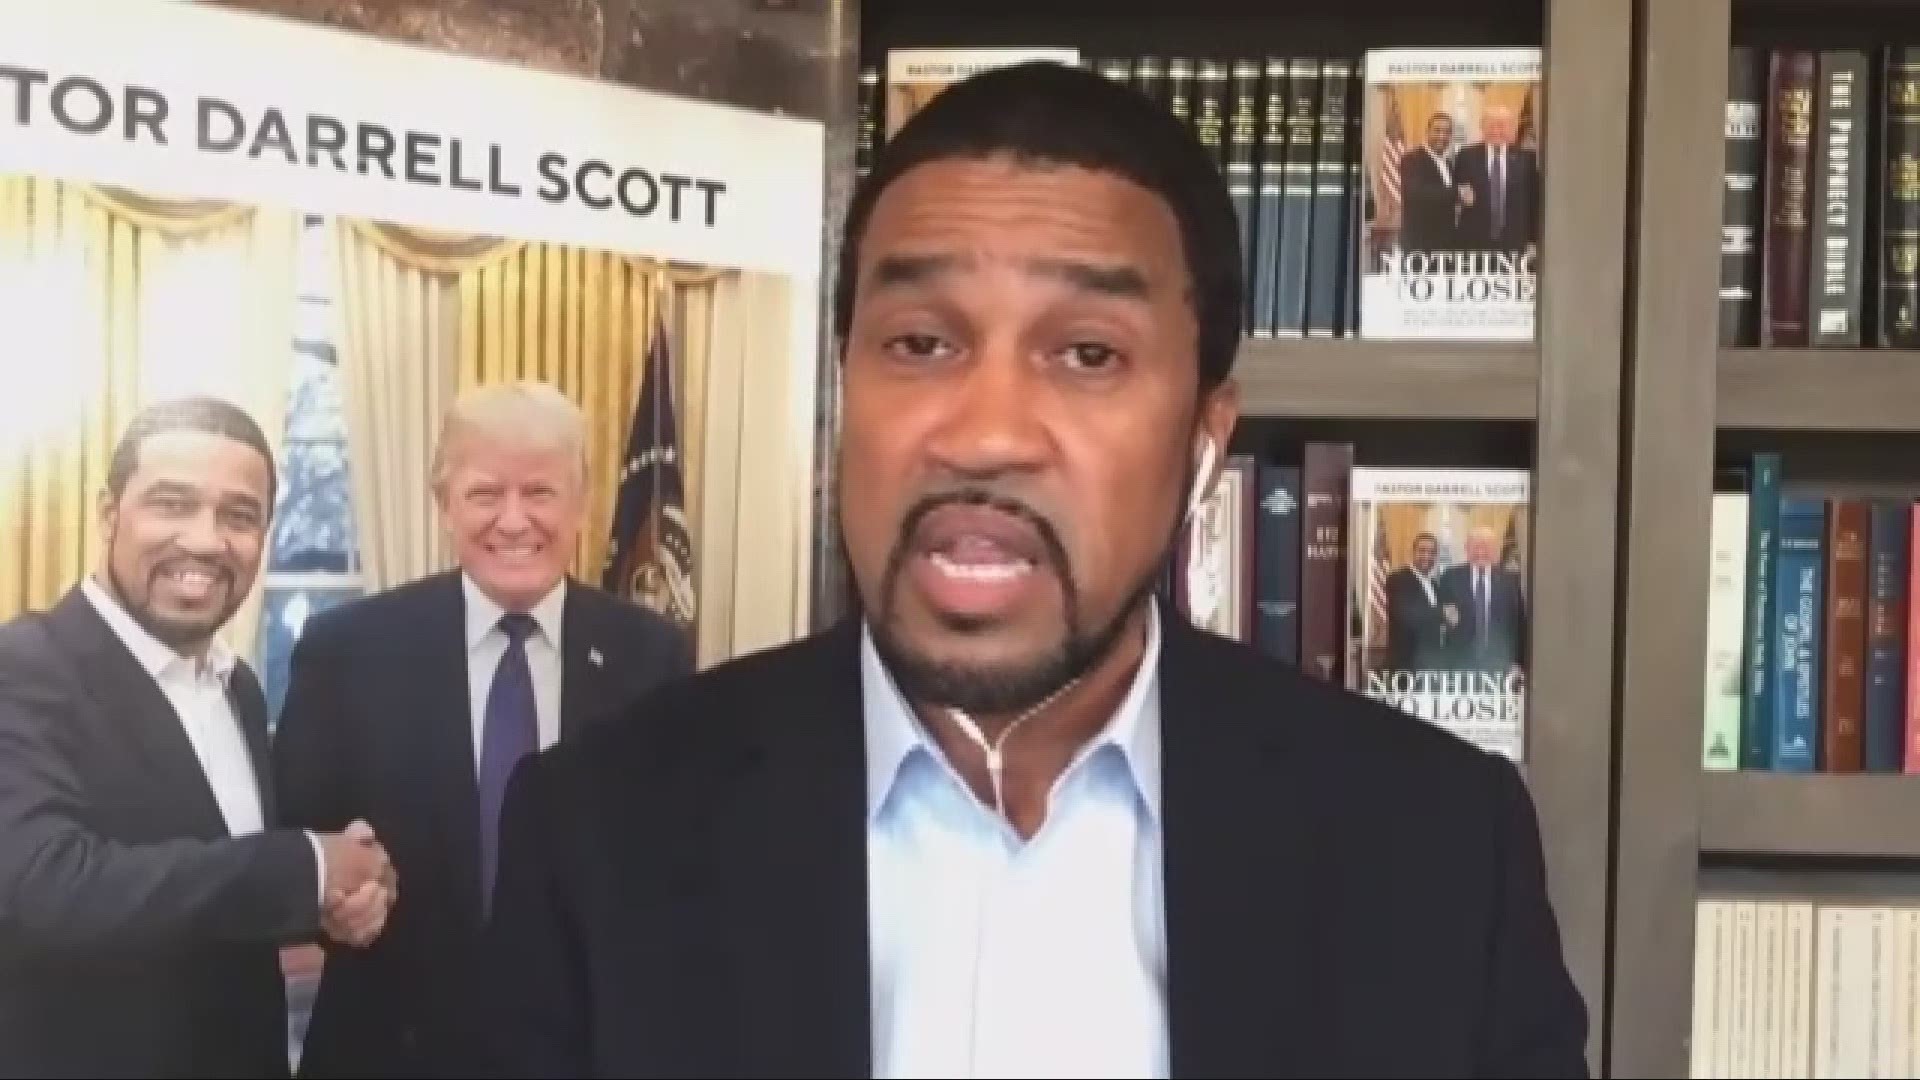 Darrell Scott , a local pastor, is an outspoken supporter of President Trump. He spoke with 3News and provided reasoning behind his thoughts and beliefs.